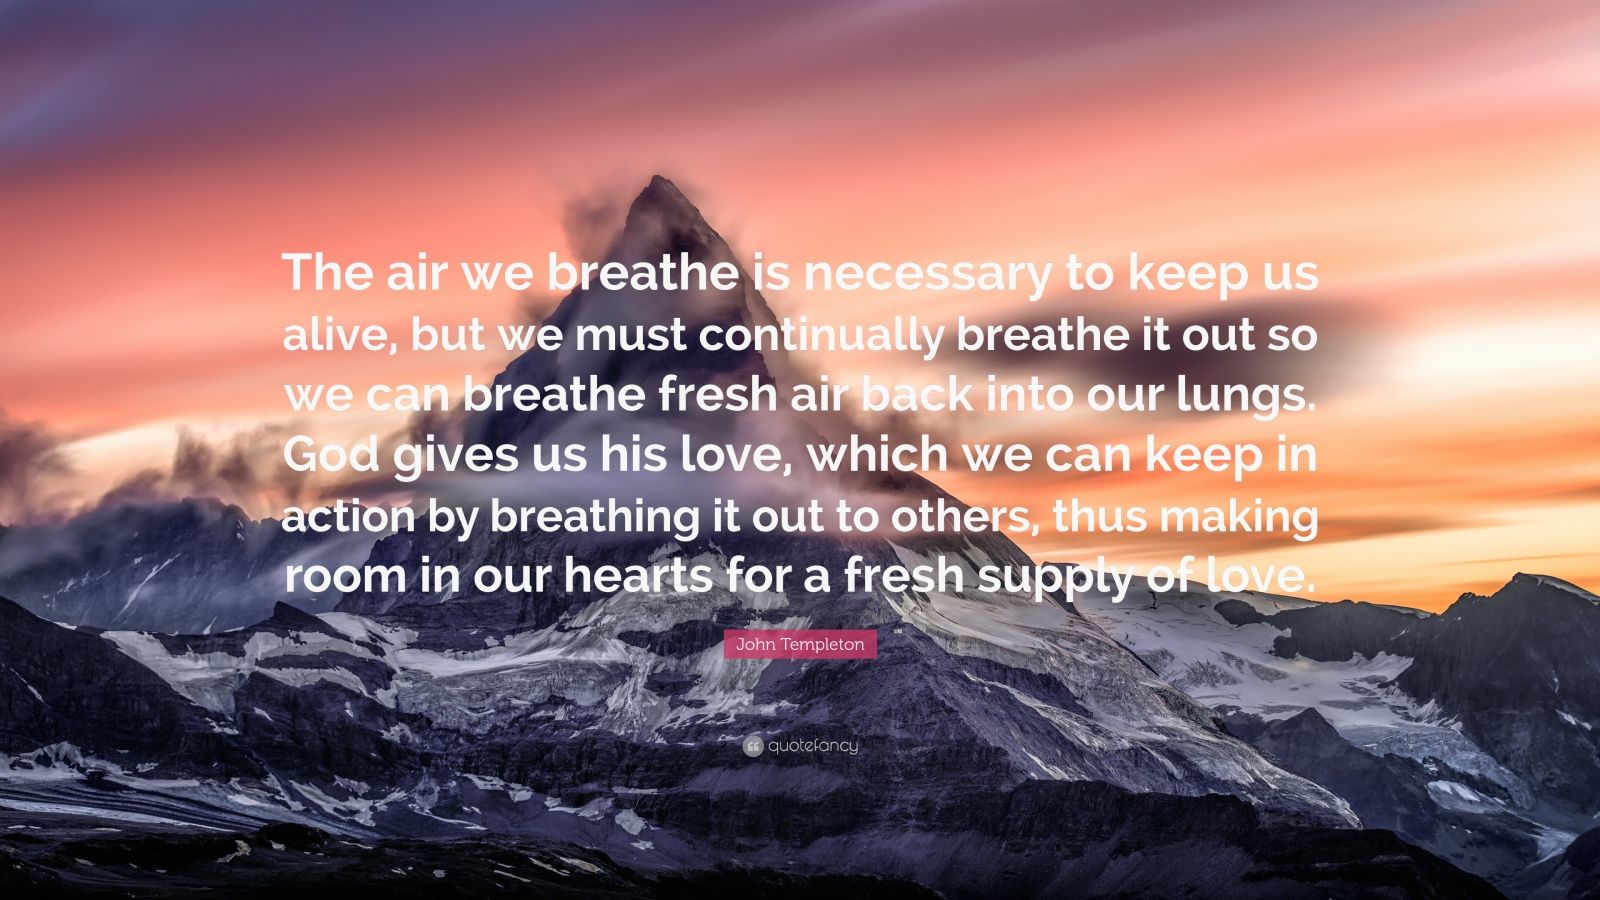 John Templeton Quote: “The air we breathe is necessary to keep us alive